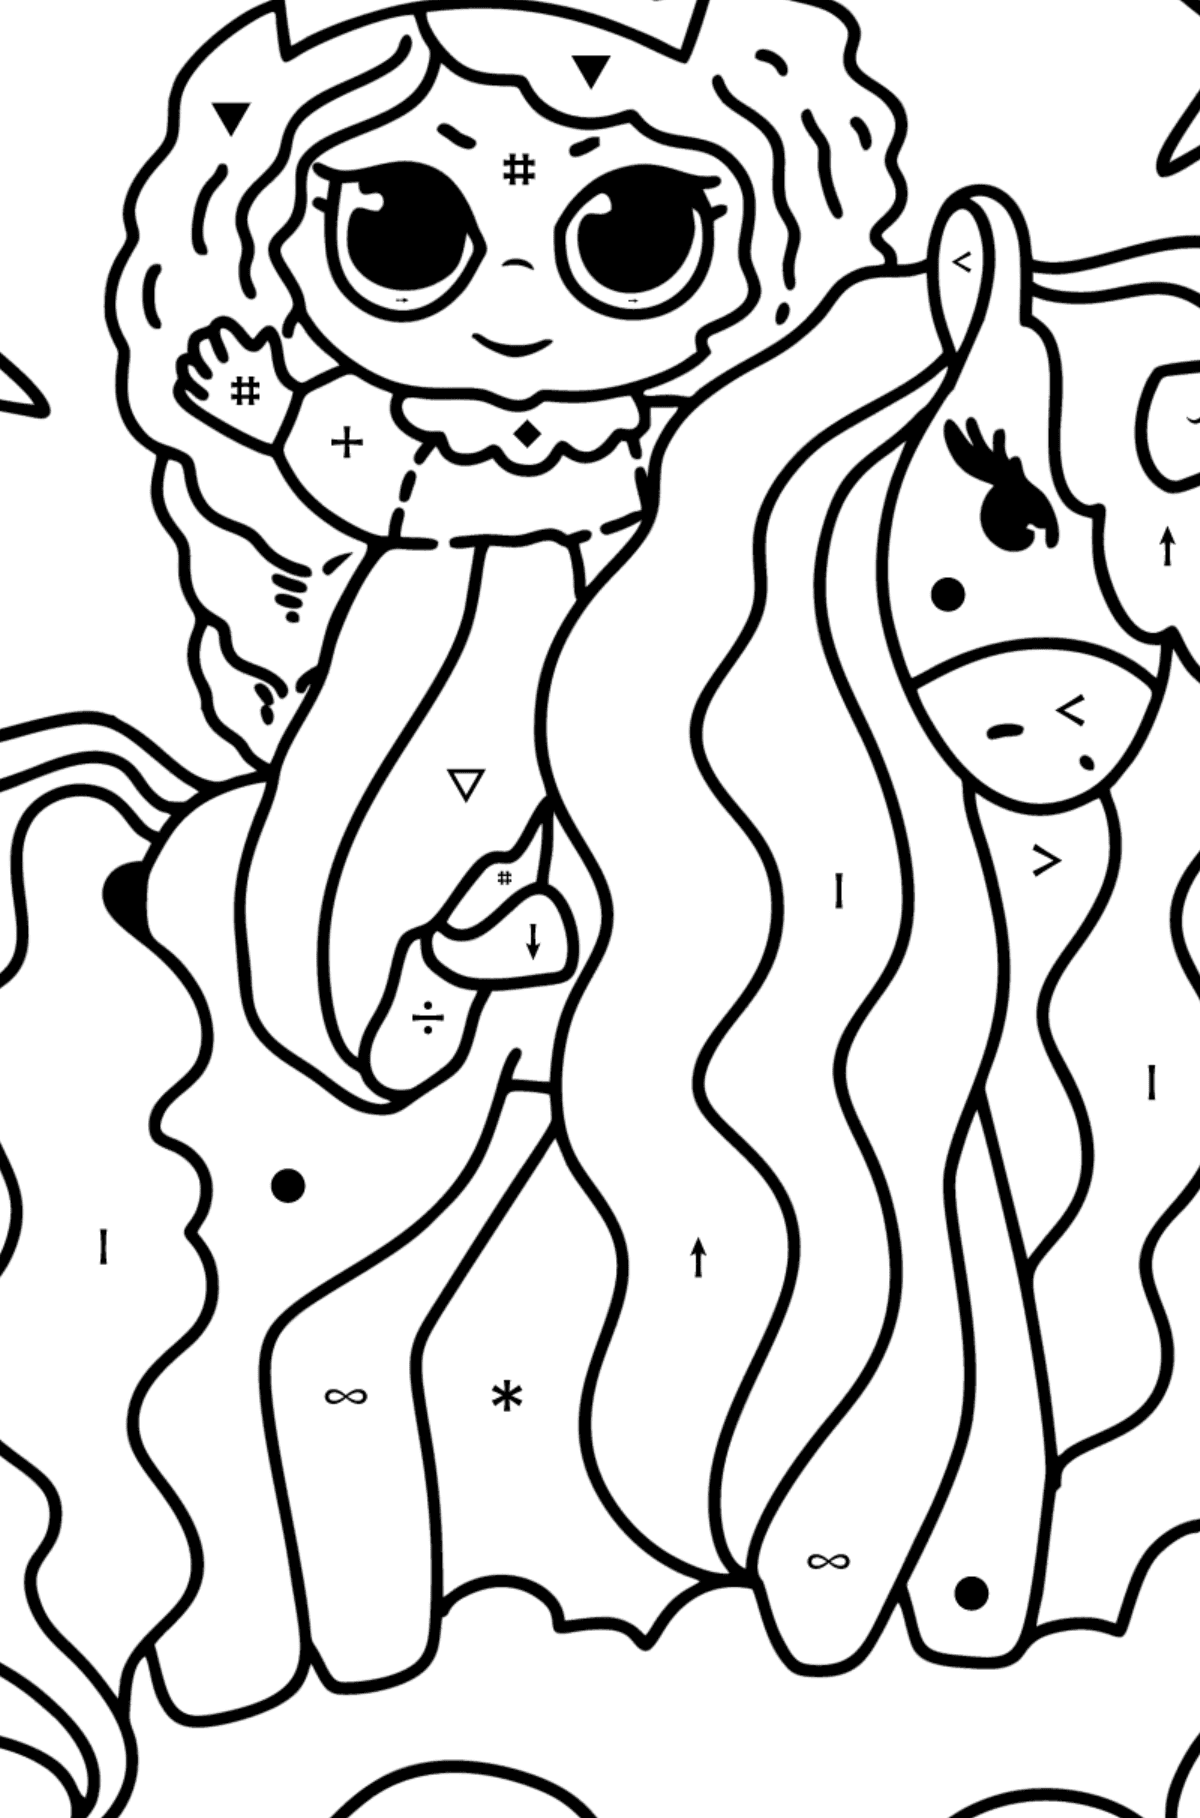 Princess and unicorn coloring page - Coloring by Symbols for Kids